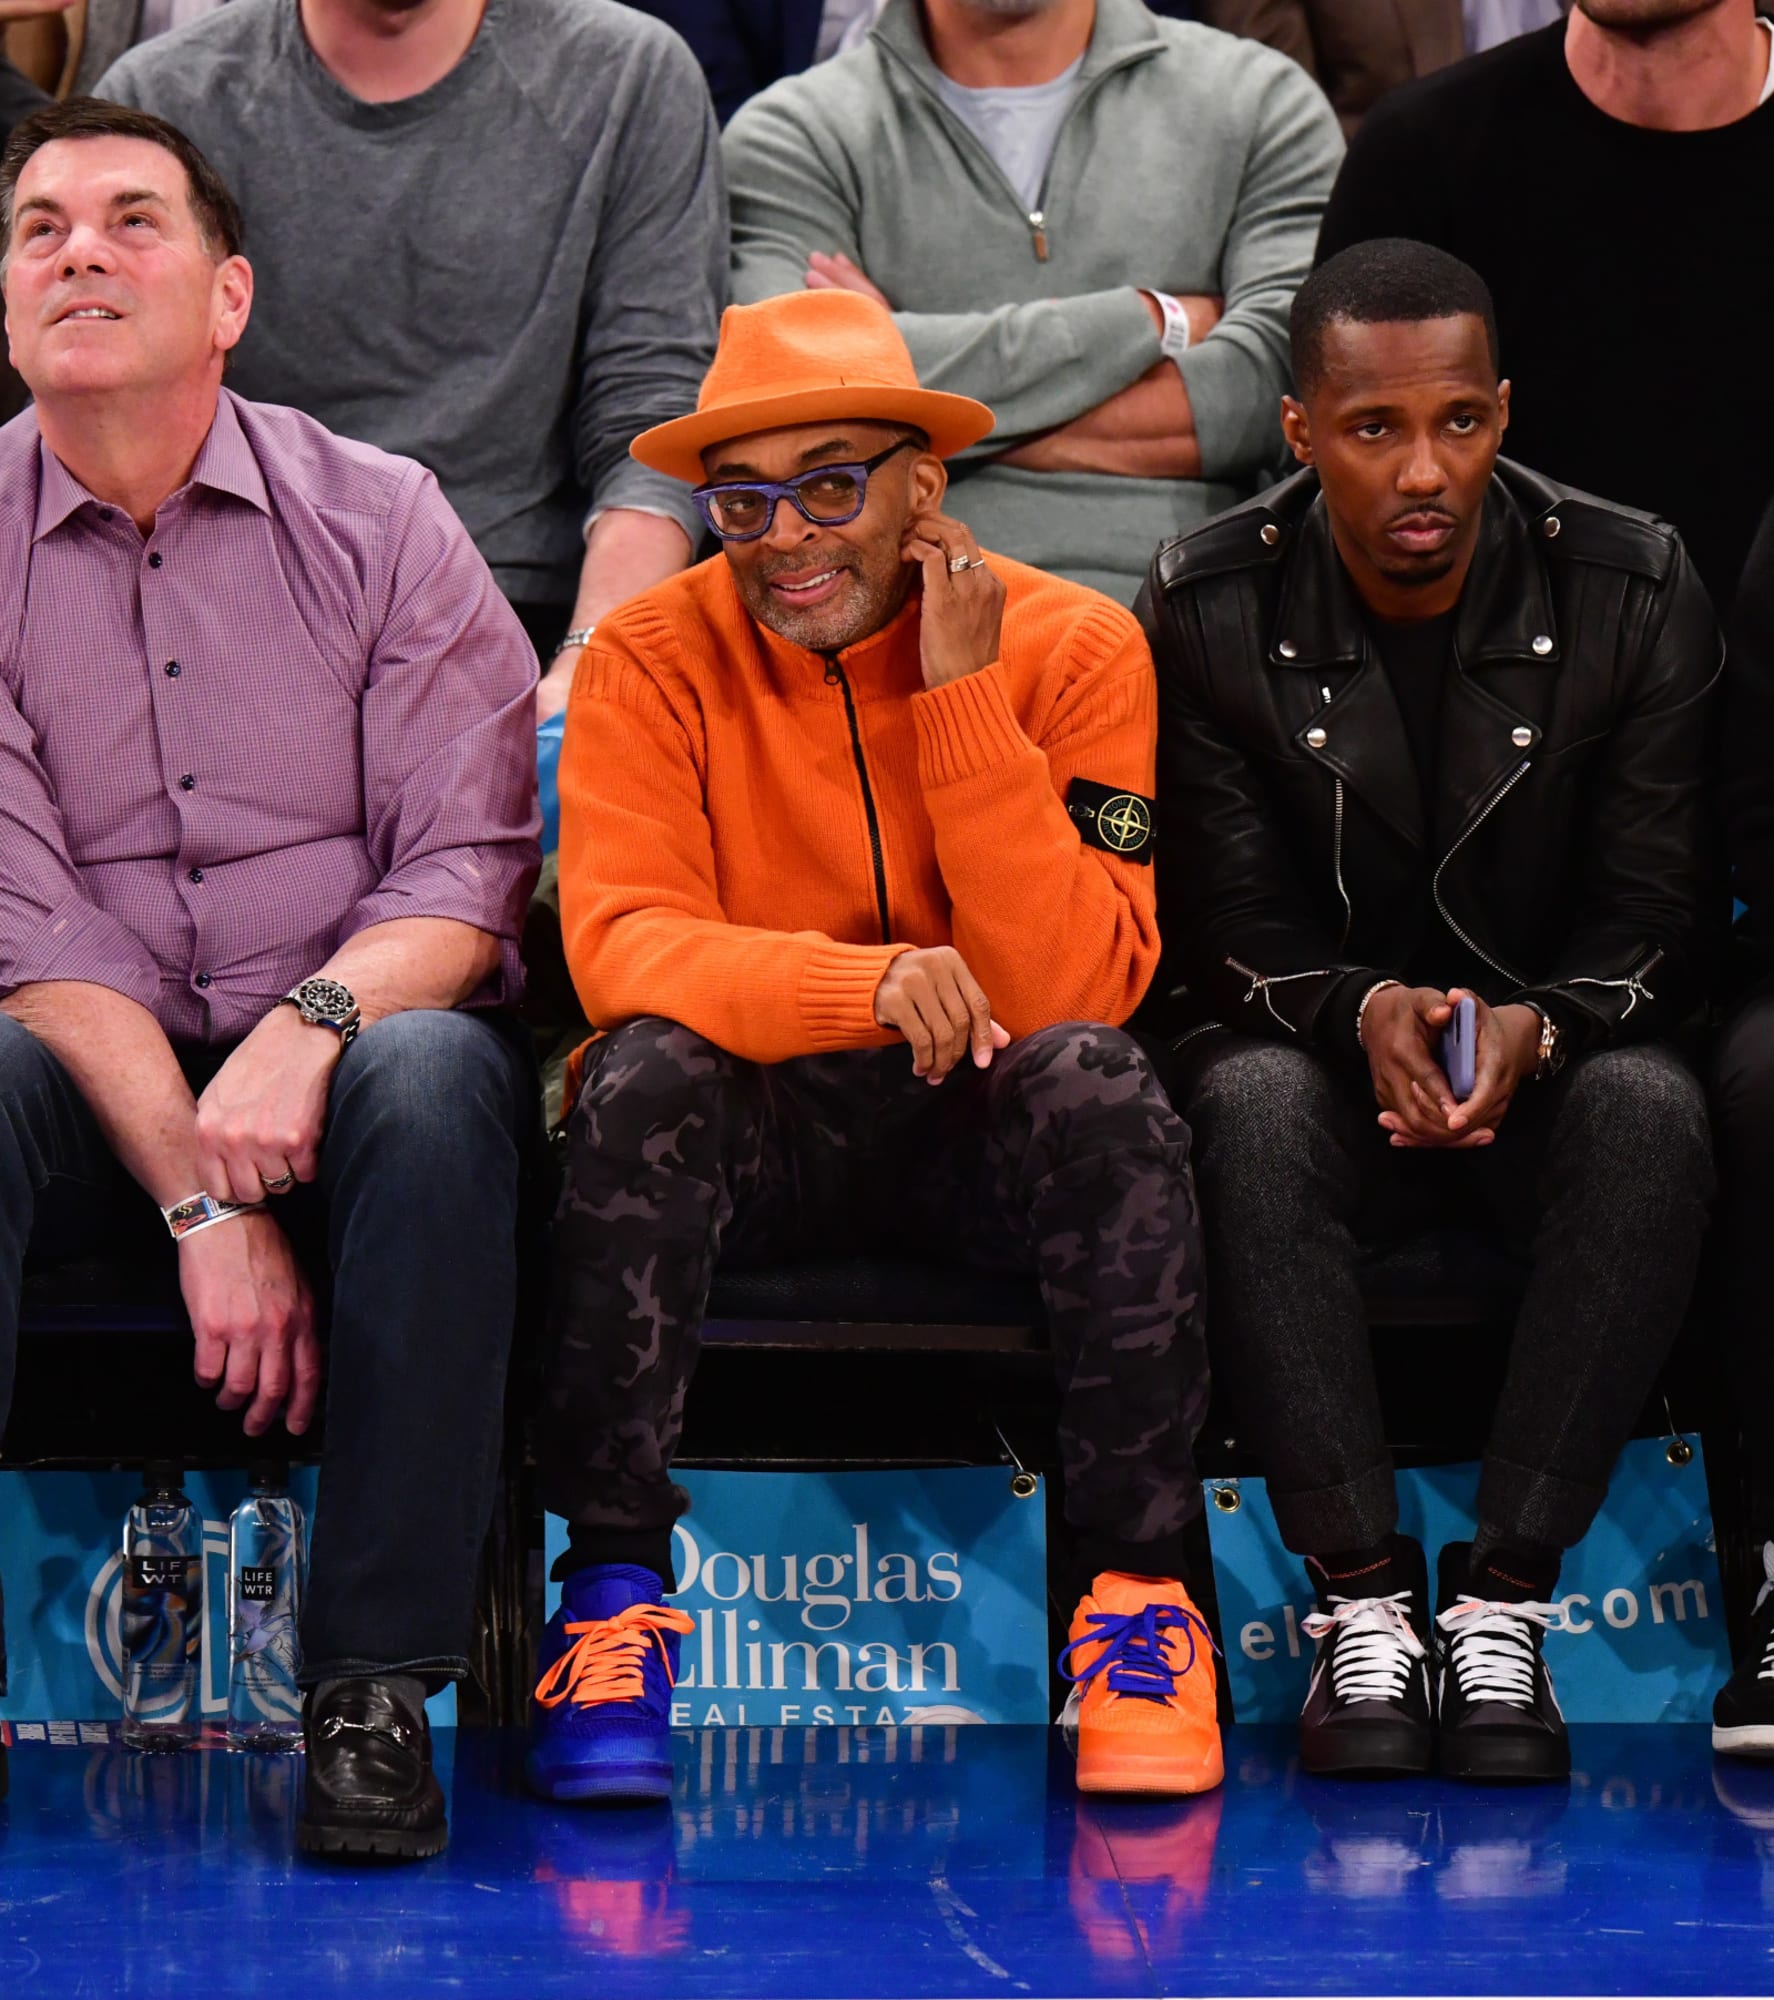 Knicks release statement on Spike Lee controversy